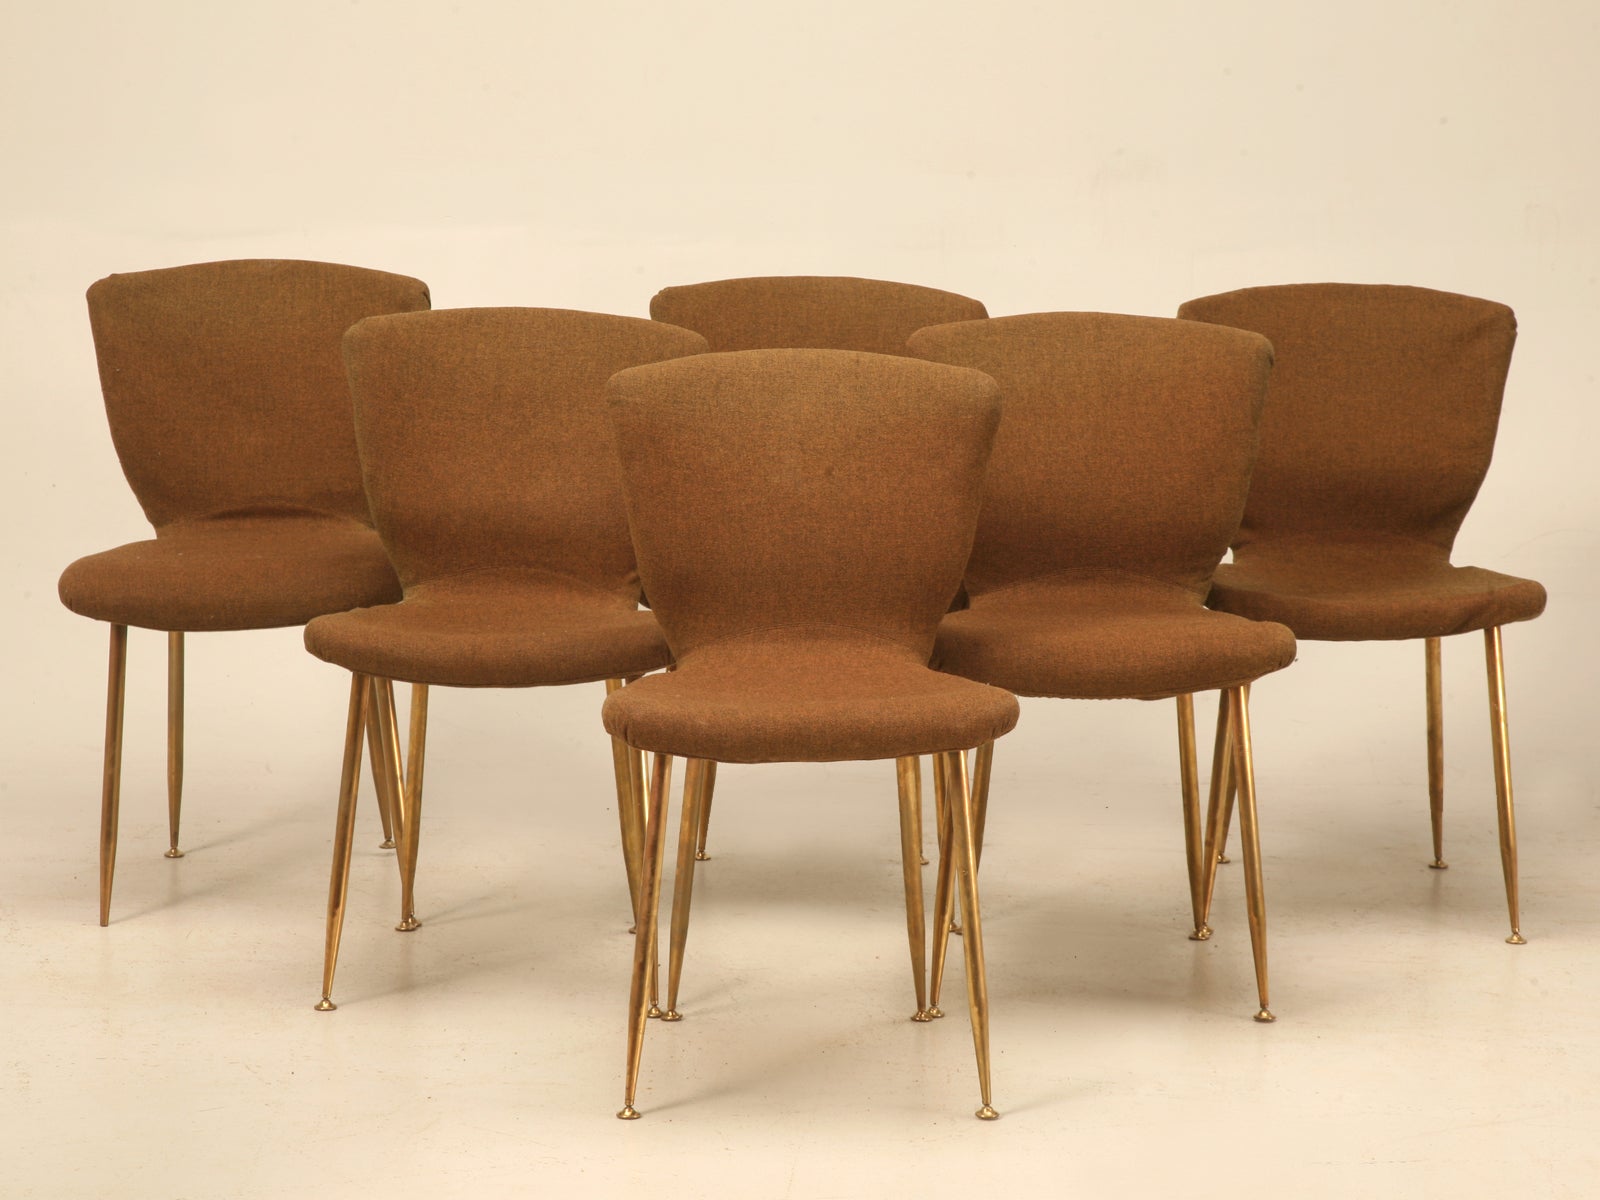 Optimum Set of 6 Original Vintage French "Sognot" Side Chairs by AR Flex